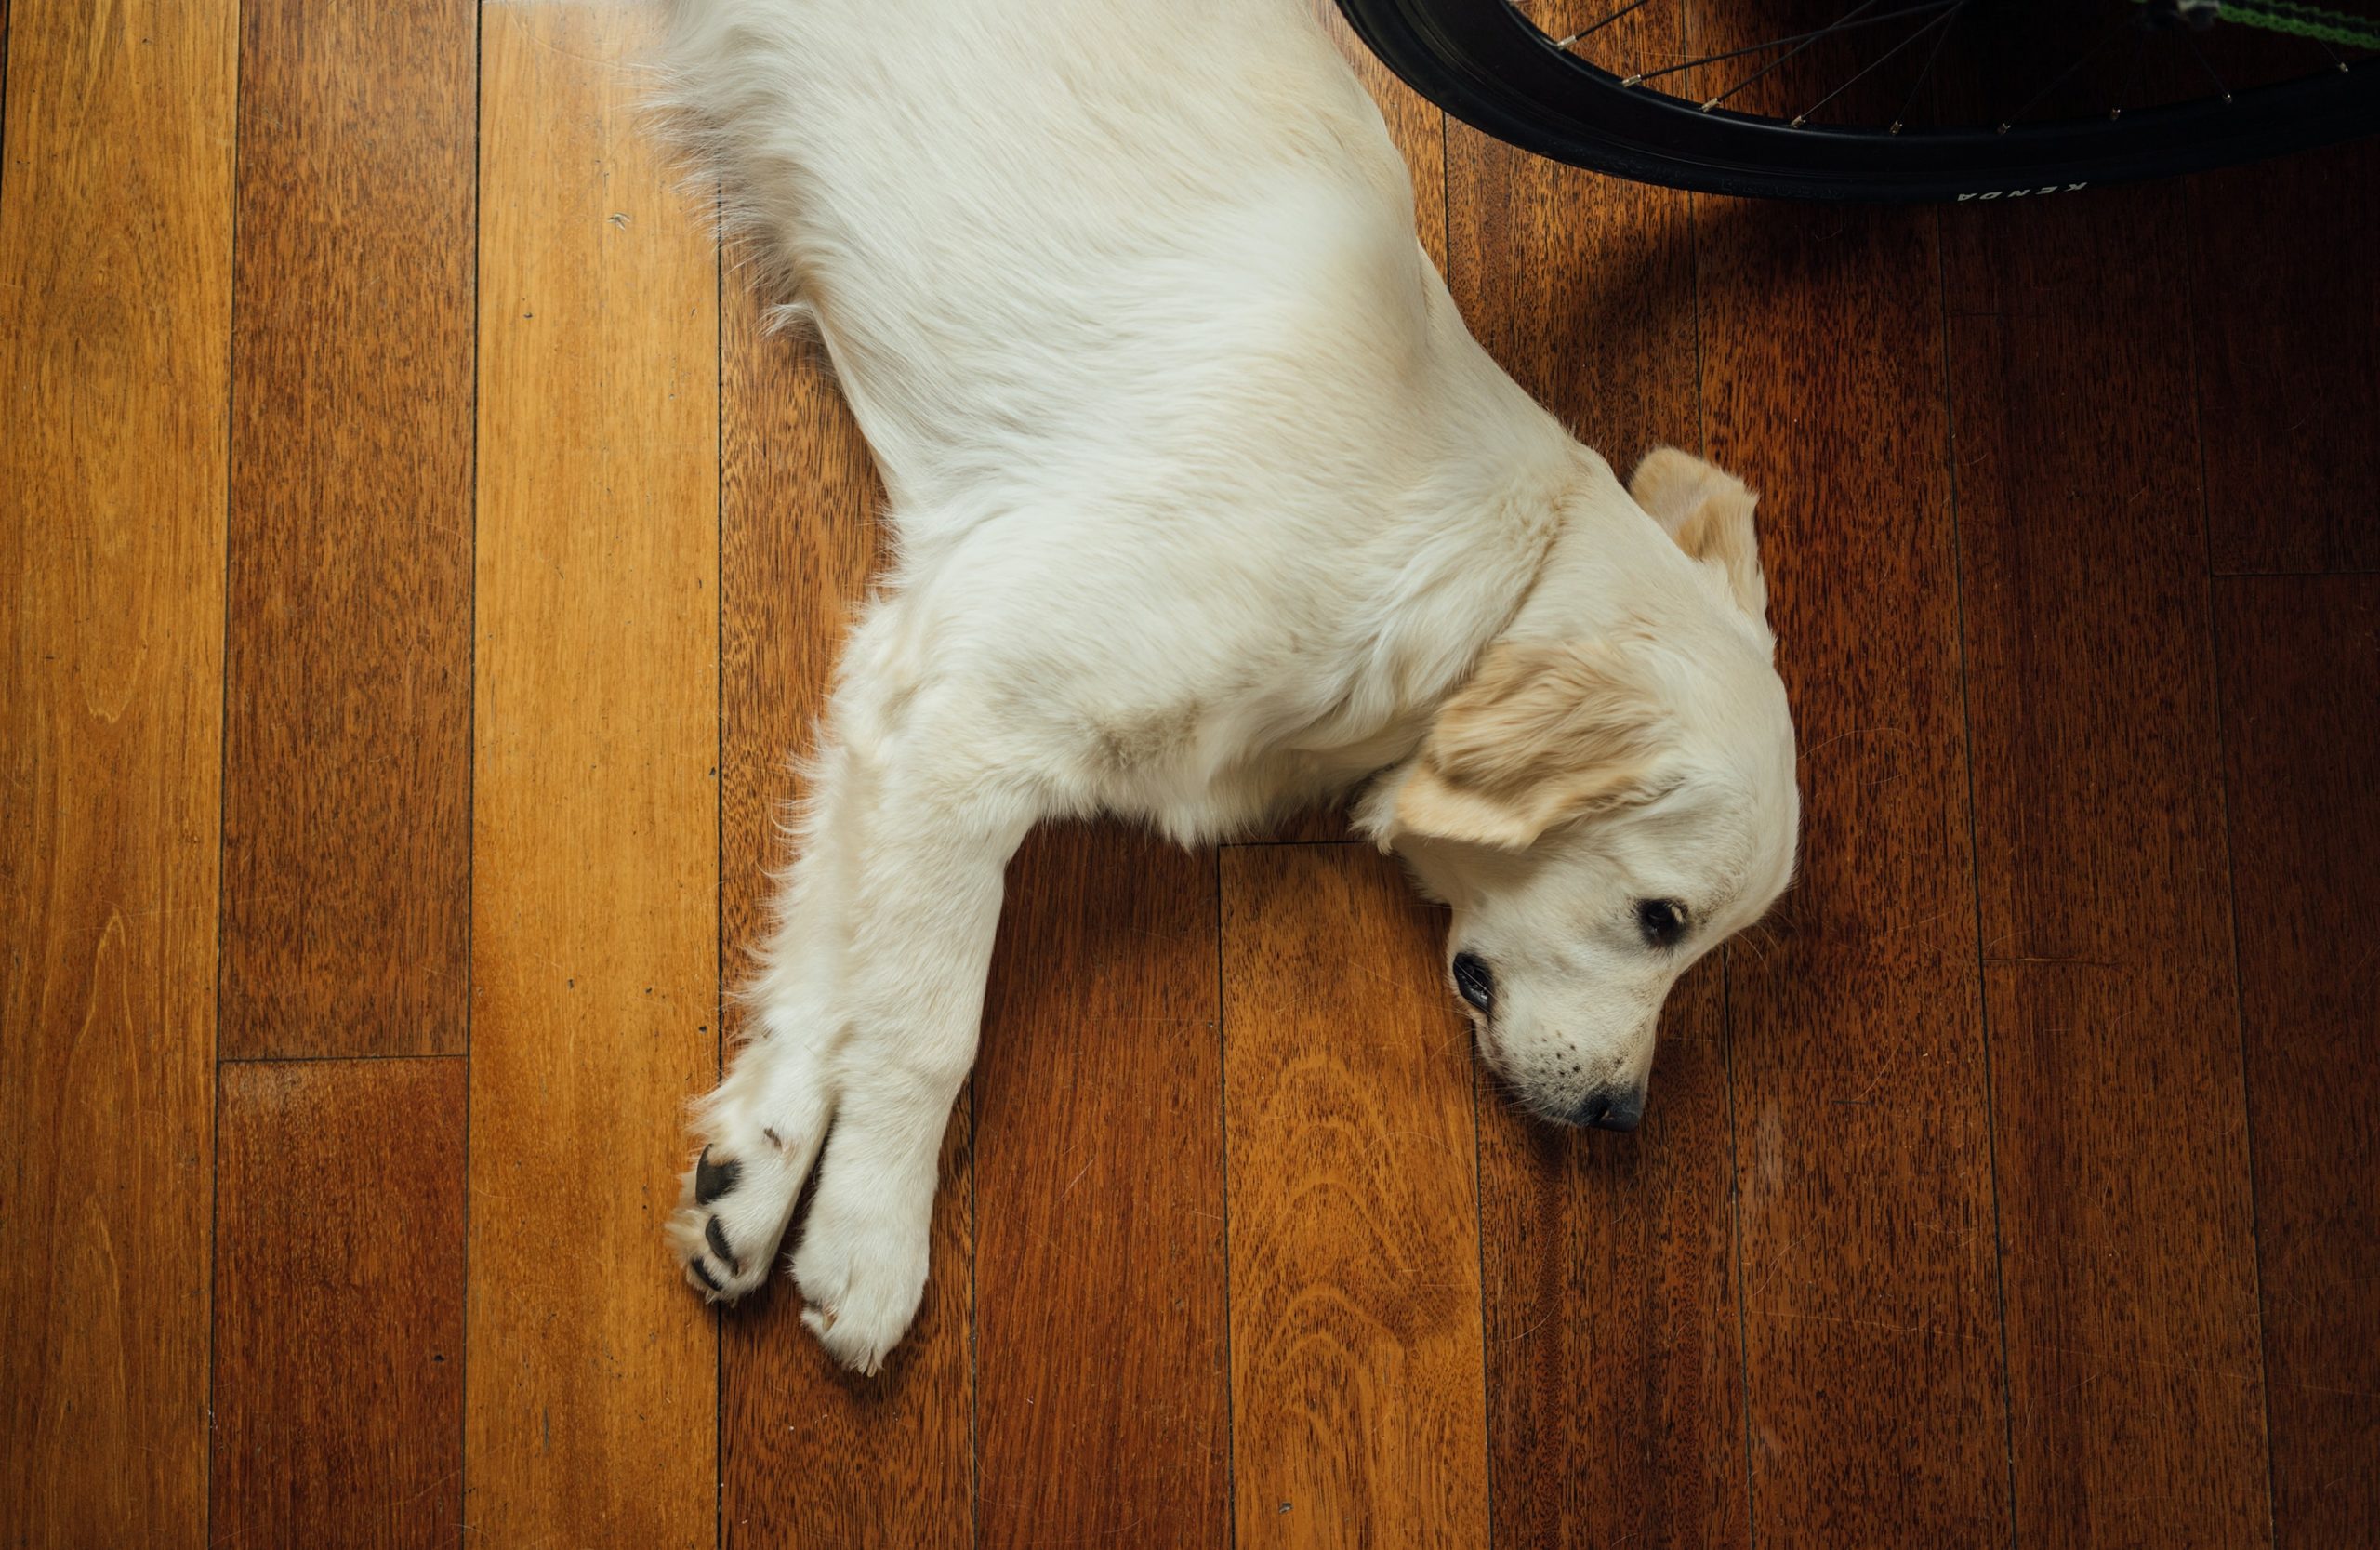 Best Wooden Floor For Cats And Dogs, Dog Drool On Hardwood Floors